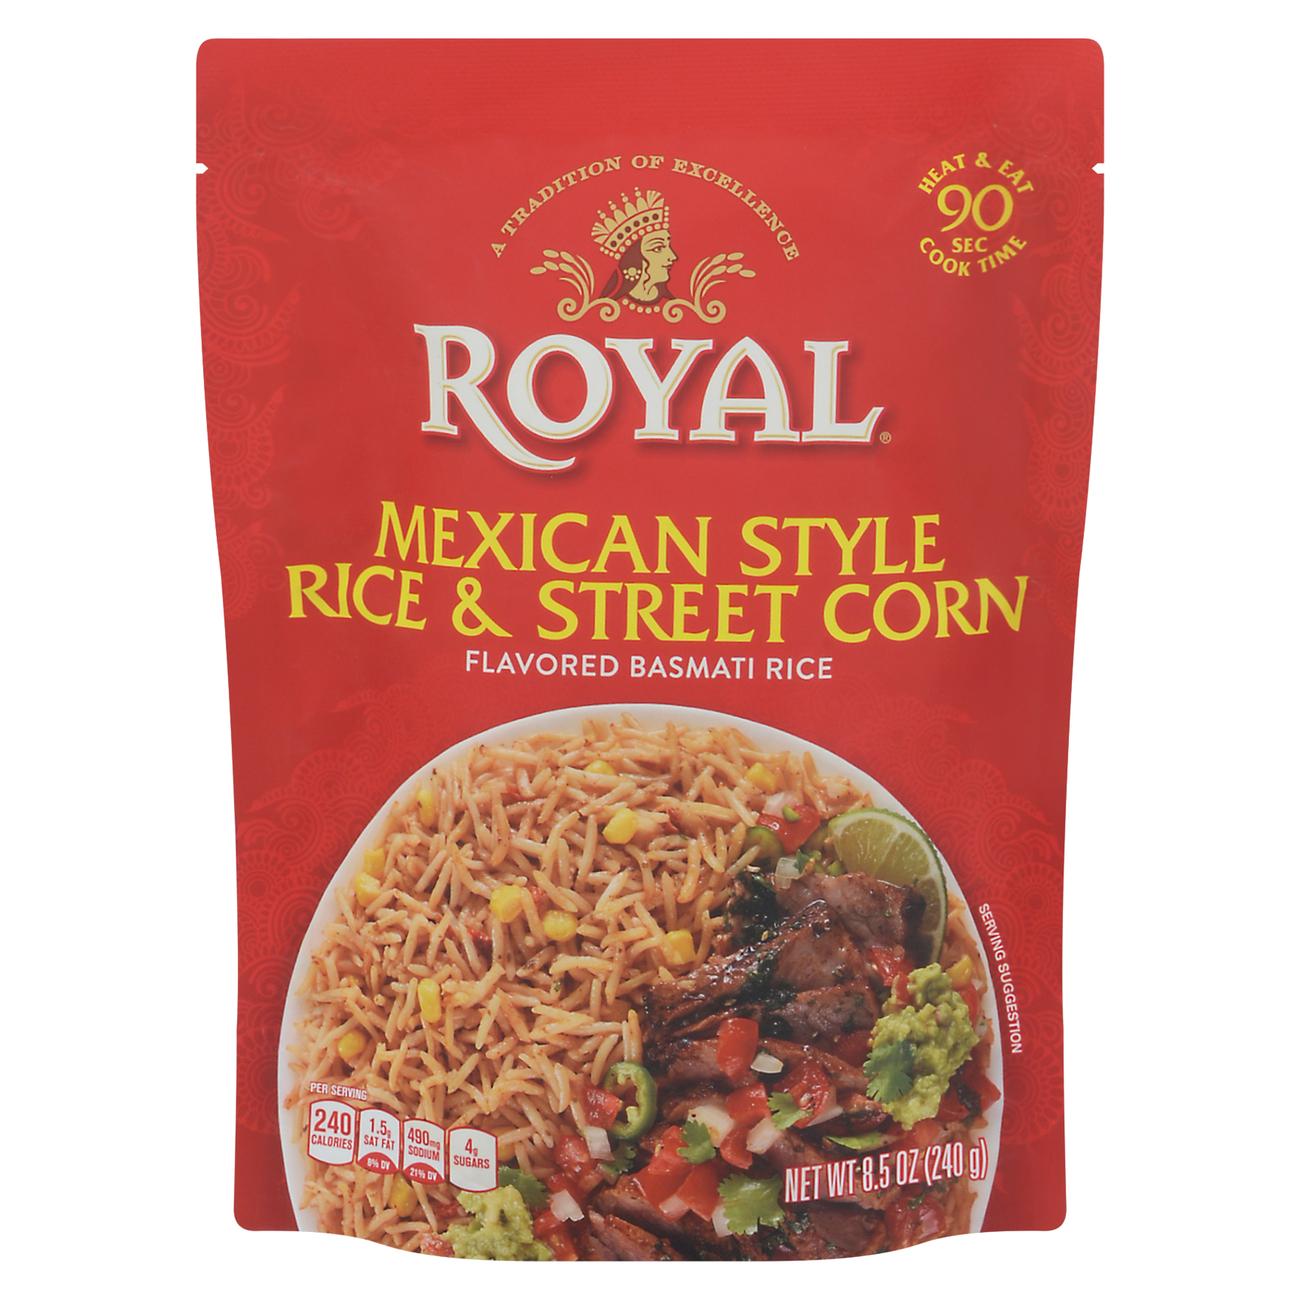 Royal Mexican Style Rice and Street Corn